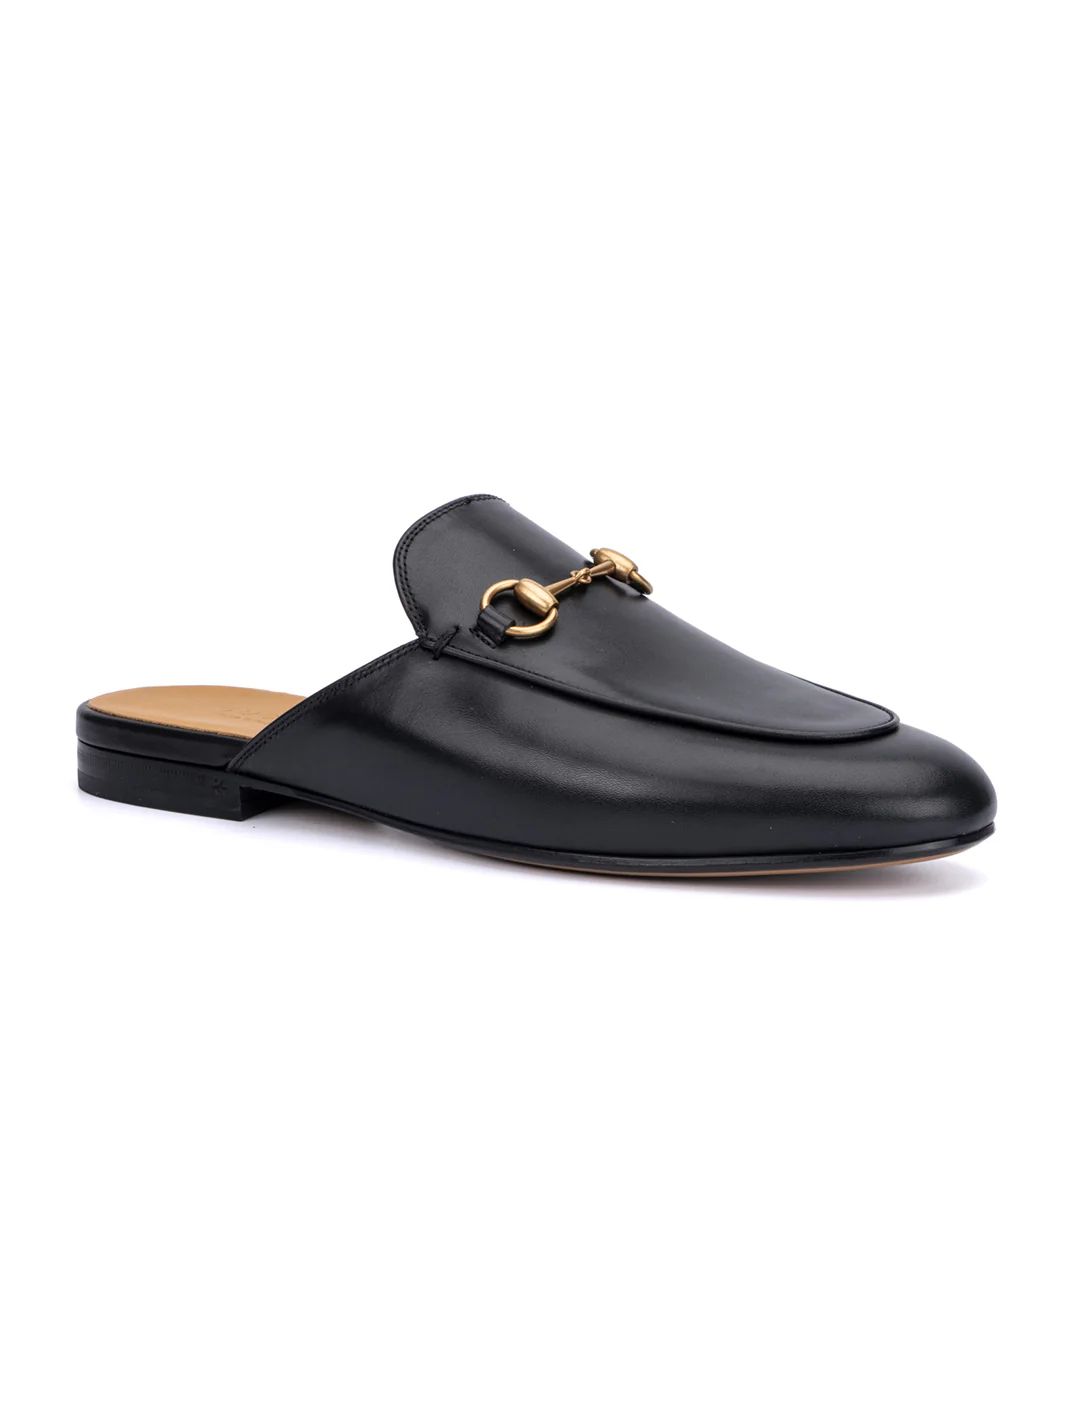 Gucci Women's Princetown Slipper in Black 37.5 Lord & Taylor | Lord & Taylor